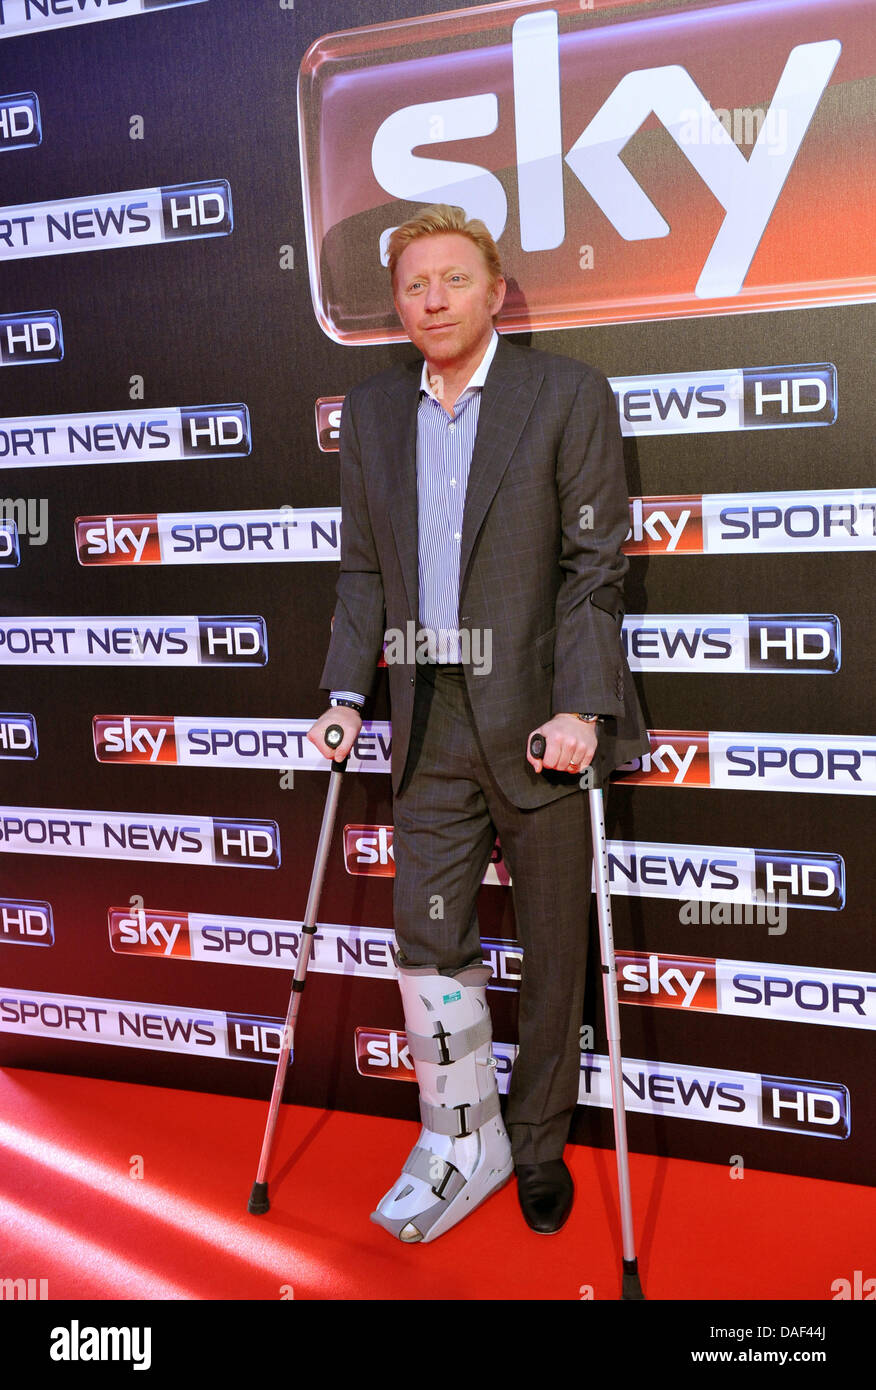 Ex-tennis professional Boris Beckerarrives to the launch of the sport news channel Sky Sport News HD by connecting giant plugs at the Sky Germany headquarters in Unterfoehring near Munich, Germany, 01 December 2011. Photo: ANDRES GEBERT Stock Photo